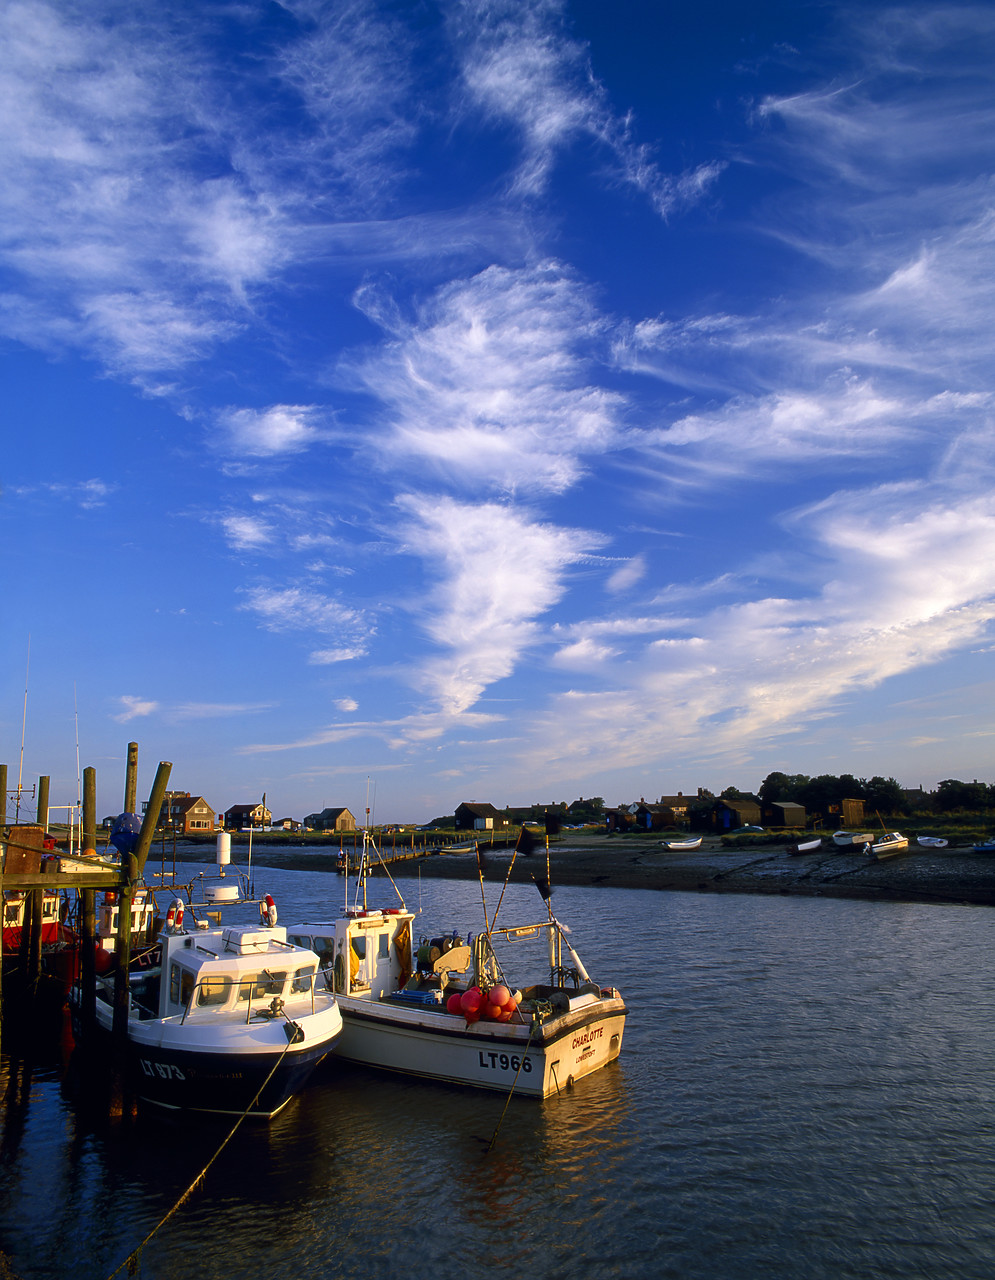 #010700-2 - Fishing Boats on River Blyth, Southwold, Suffolk, England